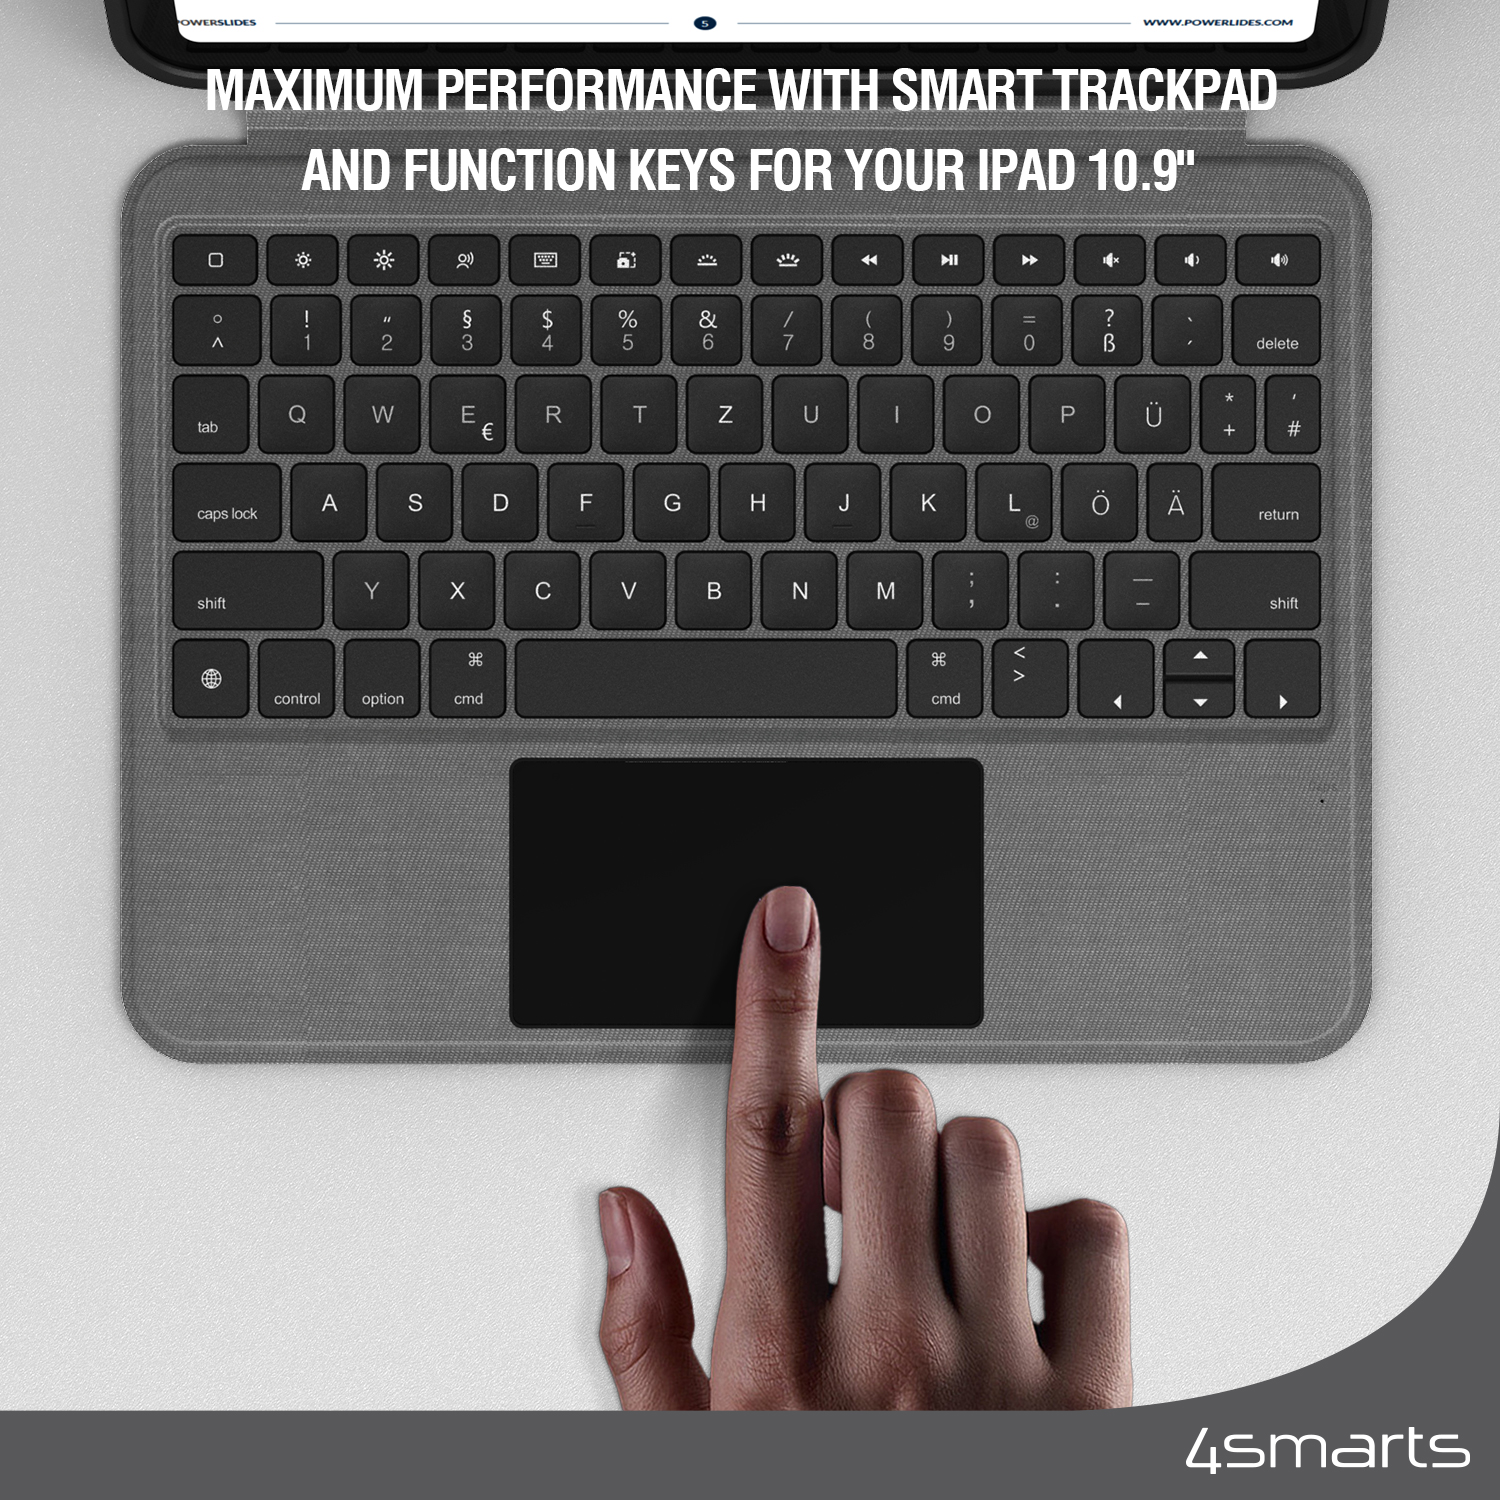 The 4smarts Case 2in1 Solid Smart Connect for iPad 10th generation features a smart trackpad and function keys.